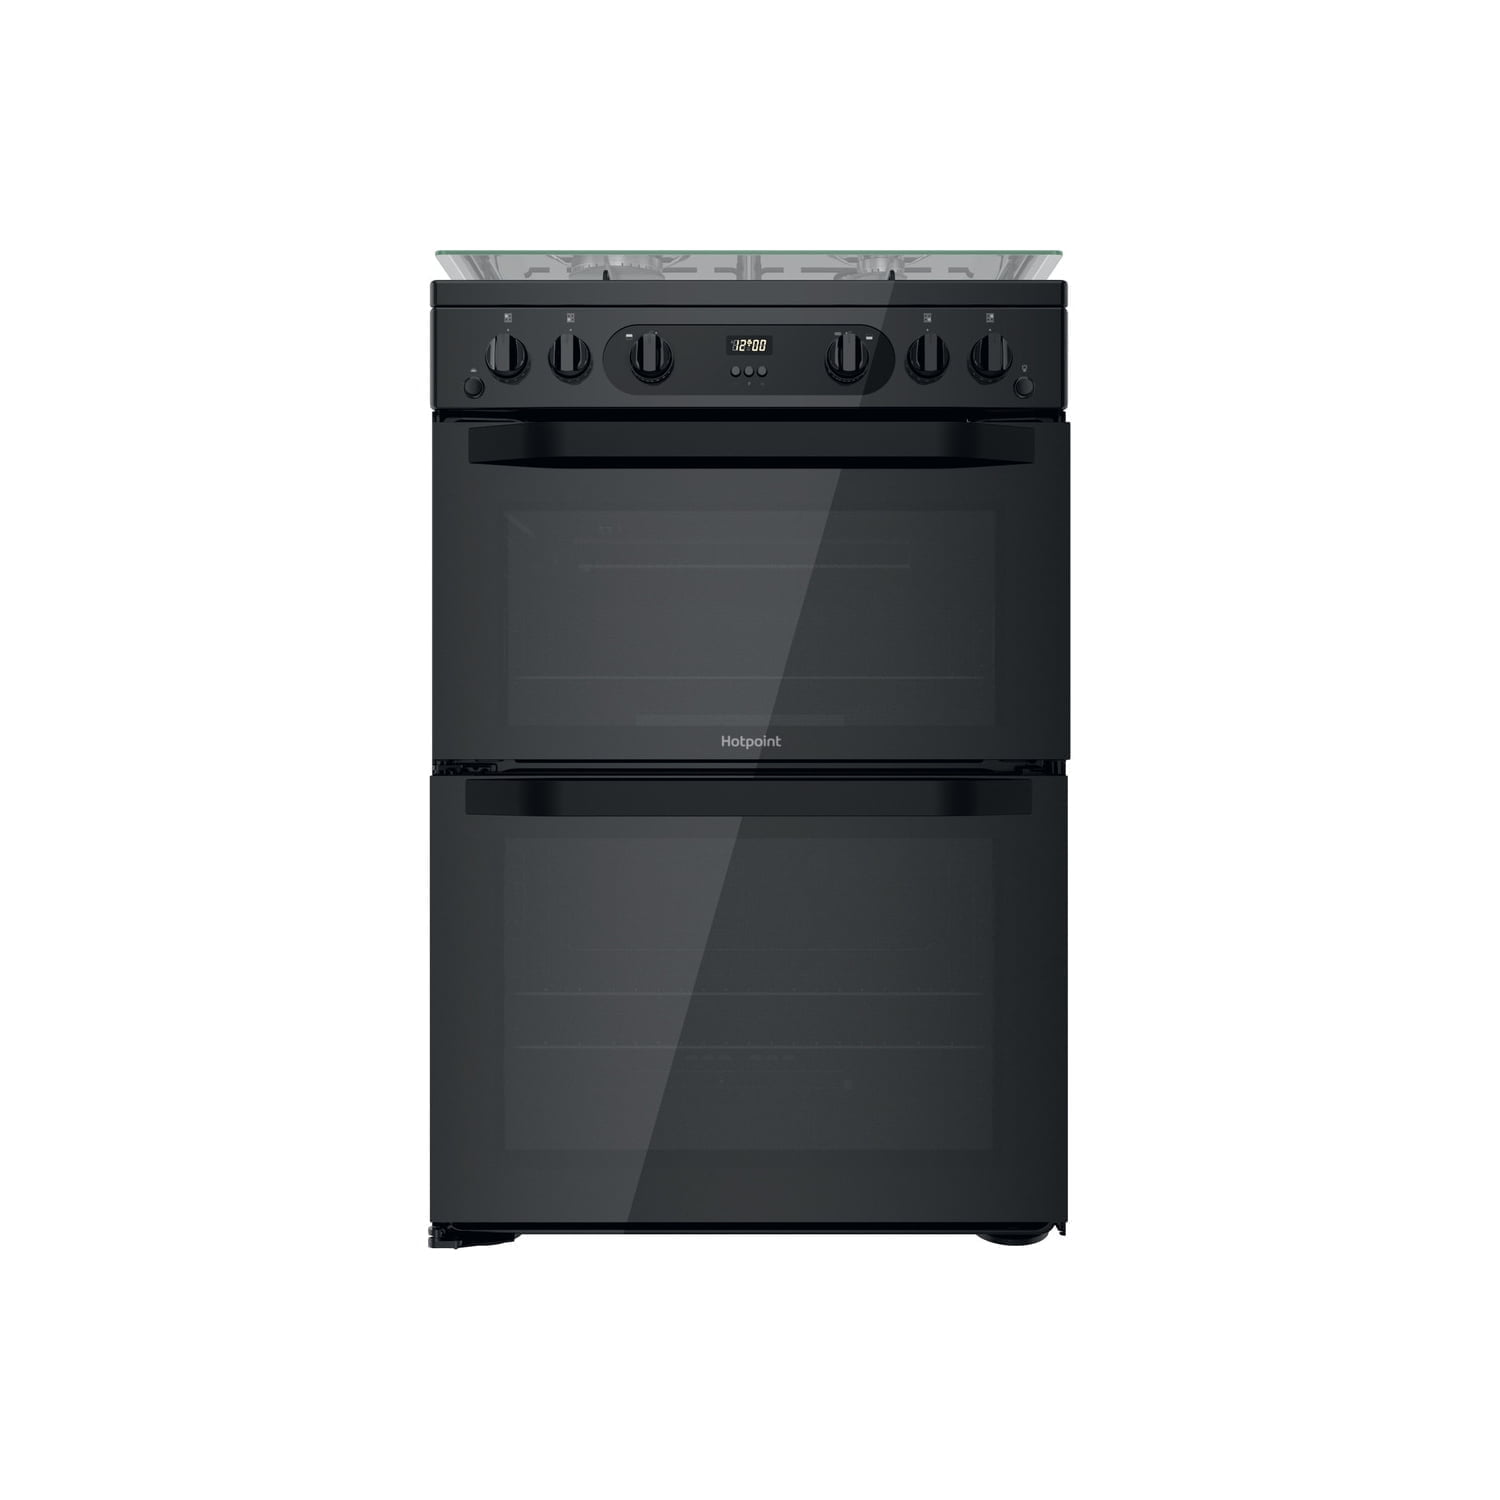 Hotpoint HDM67G0CCB/UK Gas Cooker - Black - A+/A+ Rated